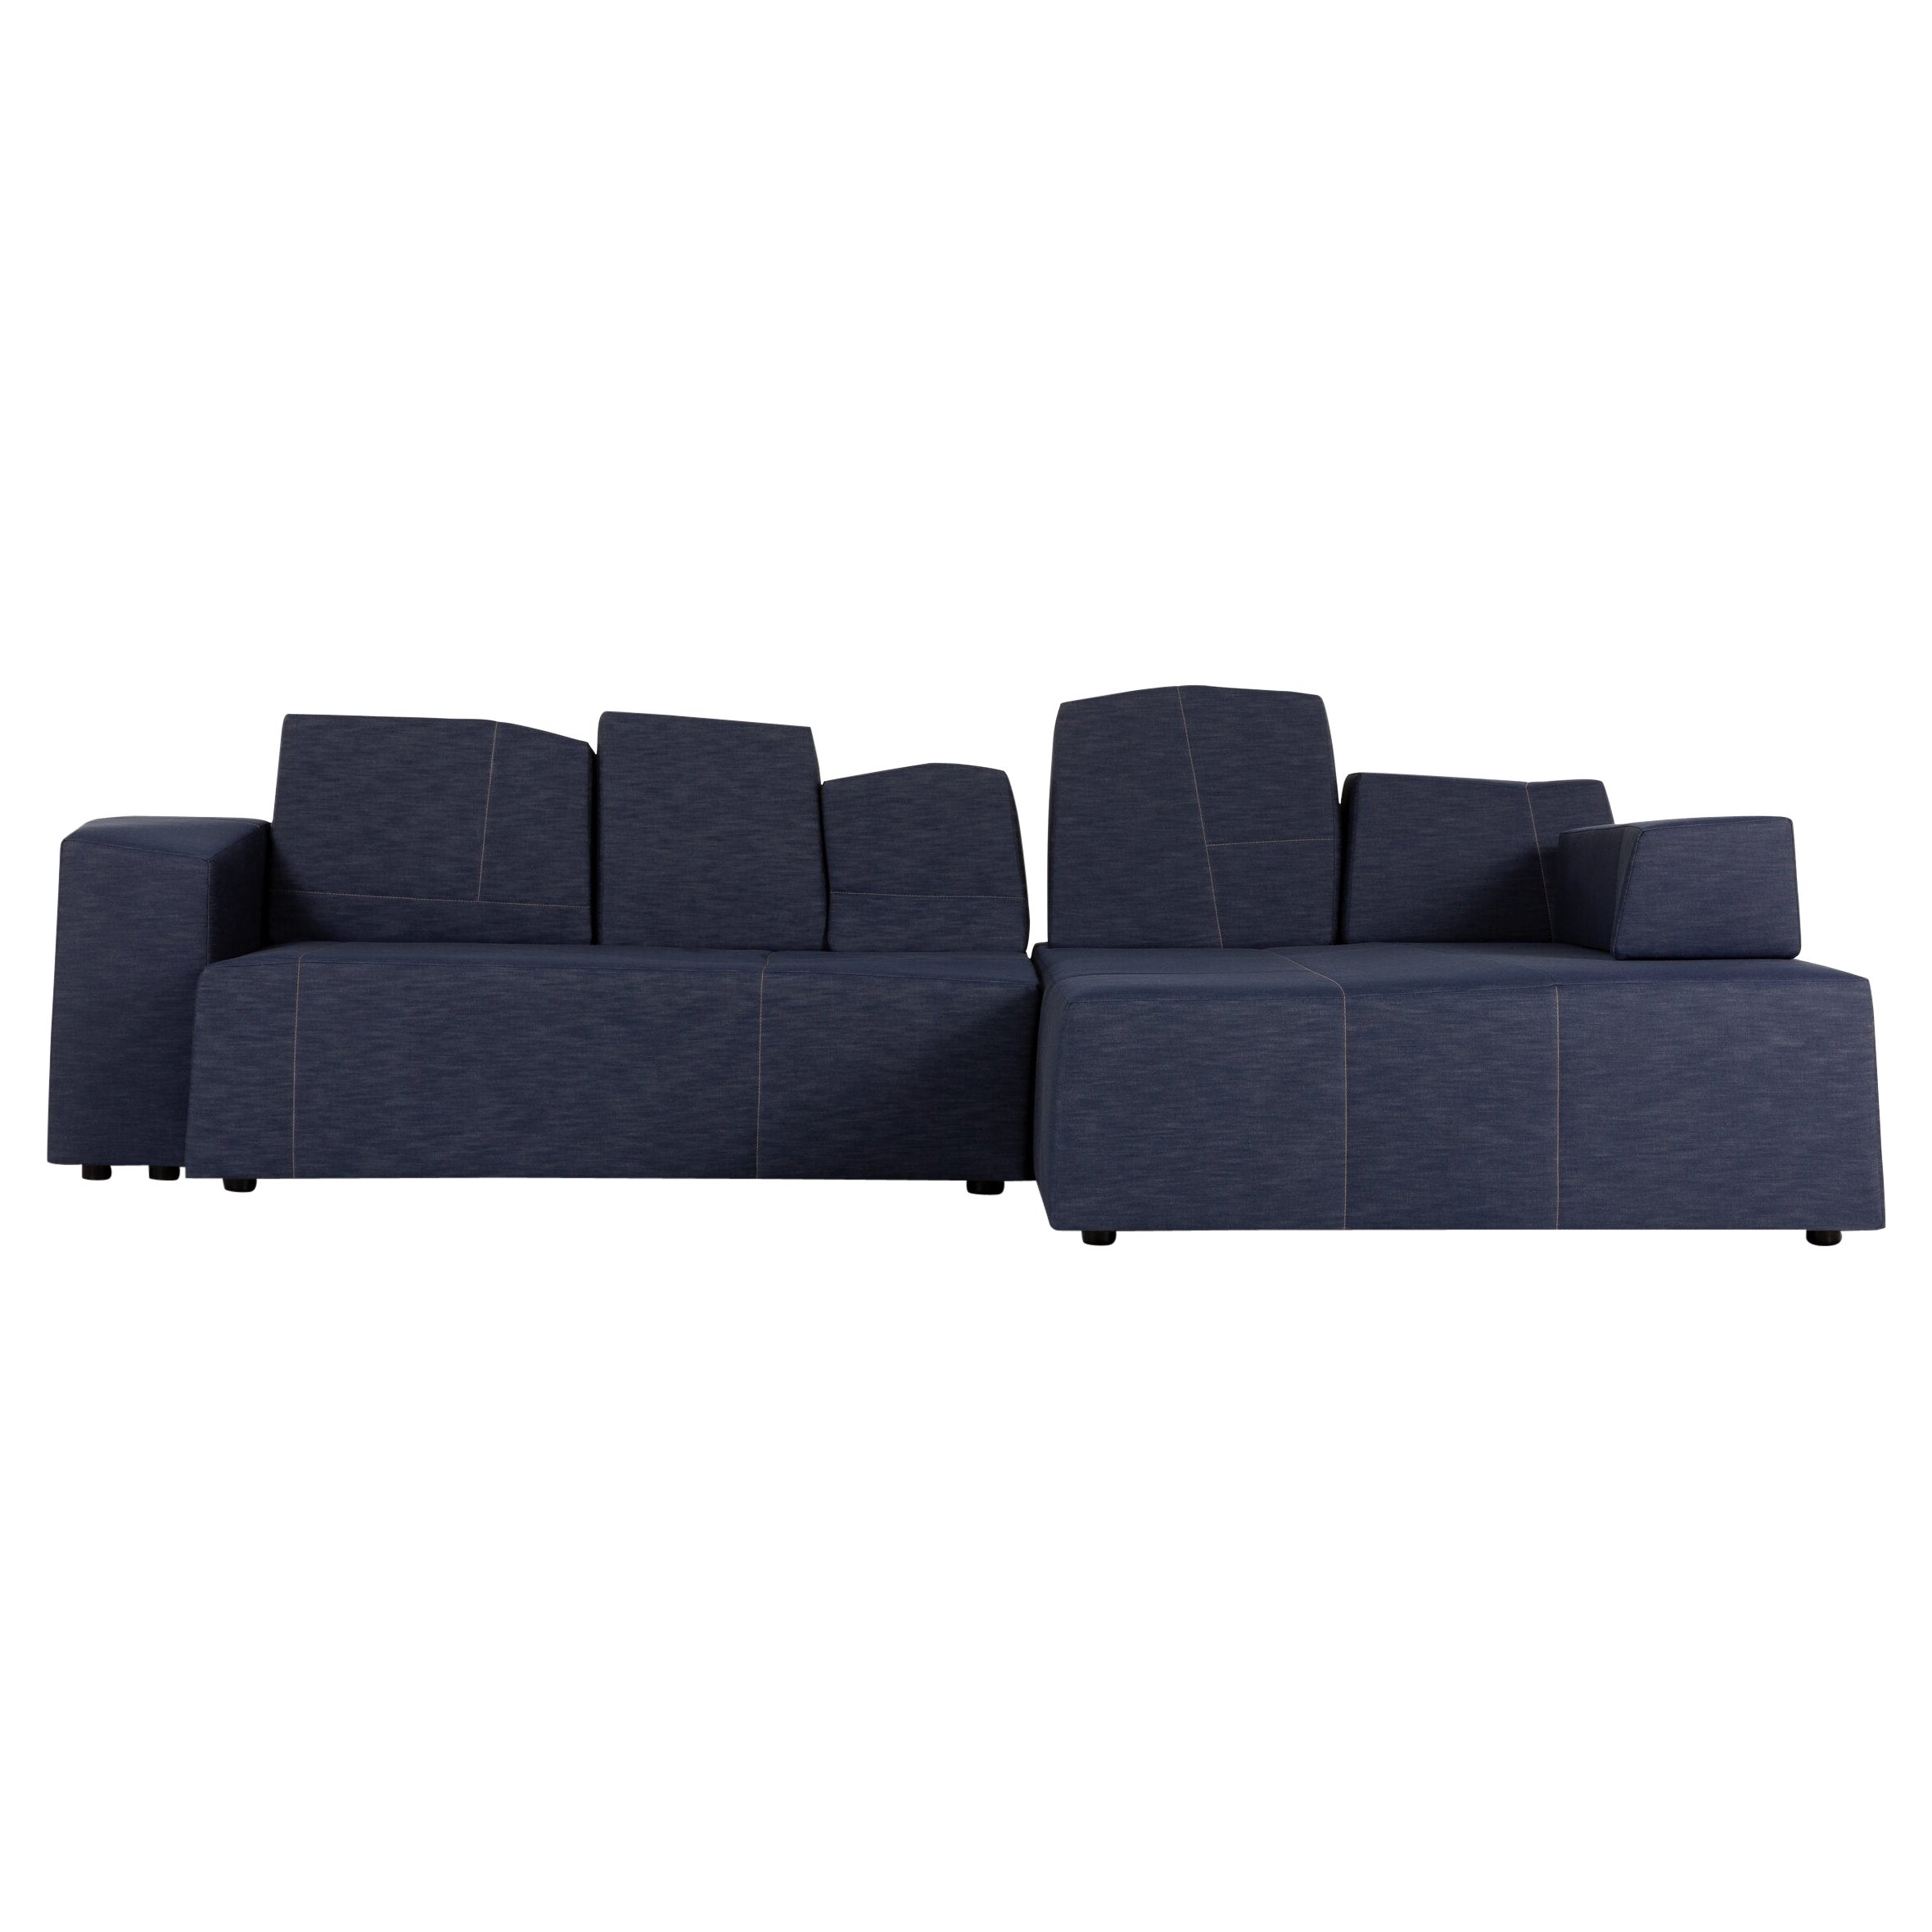 Moooi SLT Chaise Longue Right in Denim Indigo Upholstery with Steel Frame For Sale